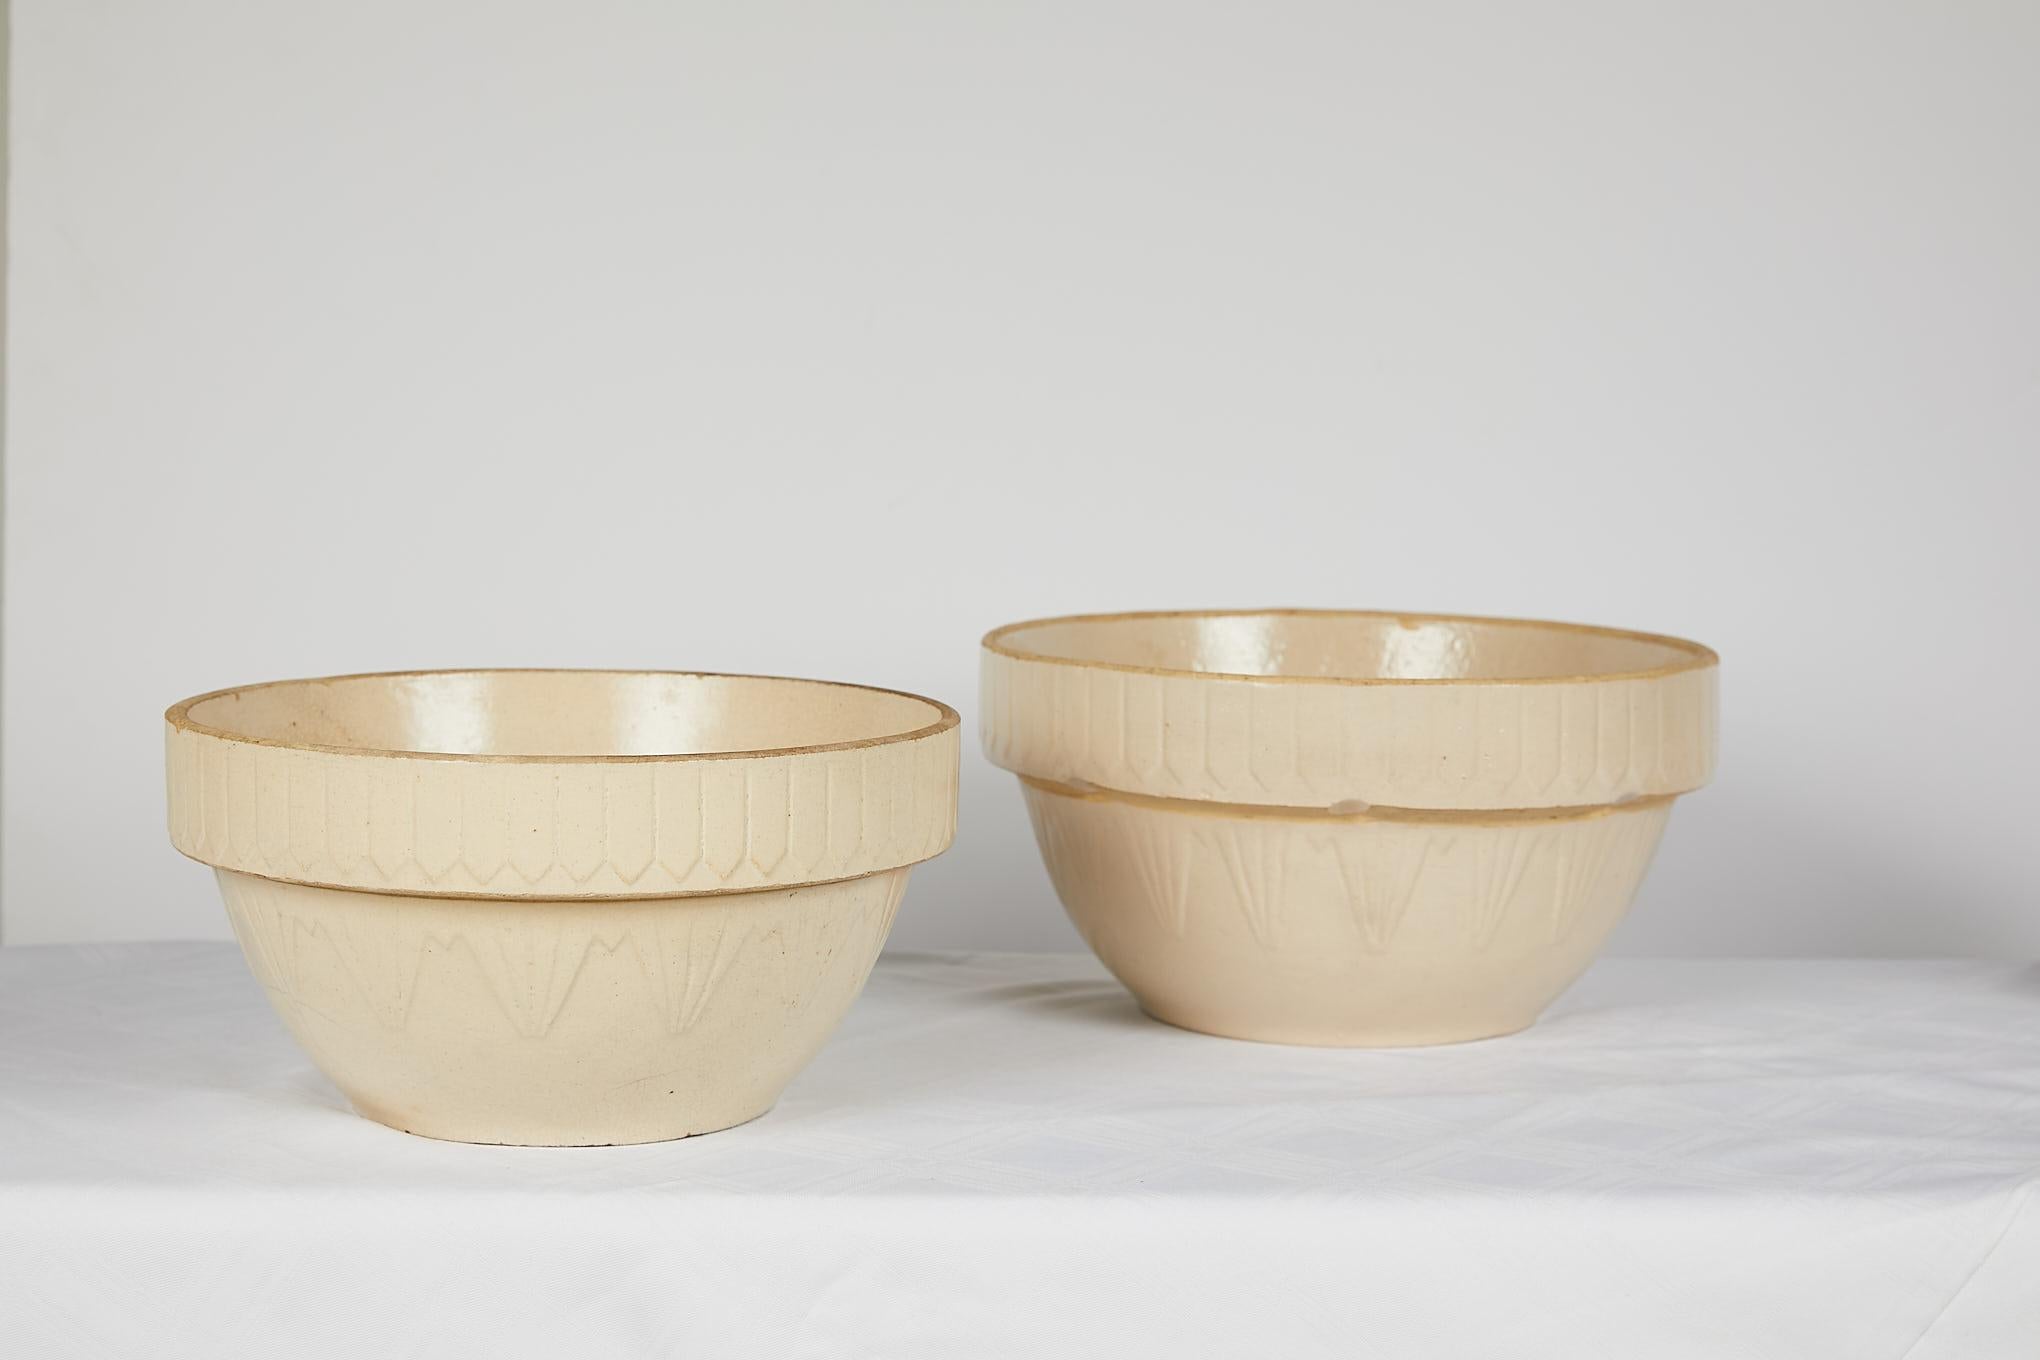 Early 20th century American Art Deco earthenware or yellow ware pottery nesting bowl set. The mixing bowls’ pattern is called the picket fence design because the decoration around the top looks like pickets. There are indentations around the rim of